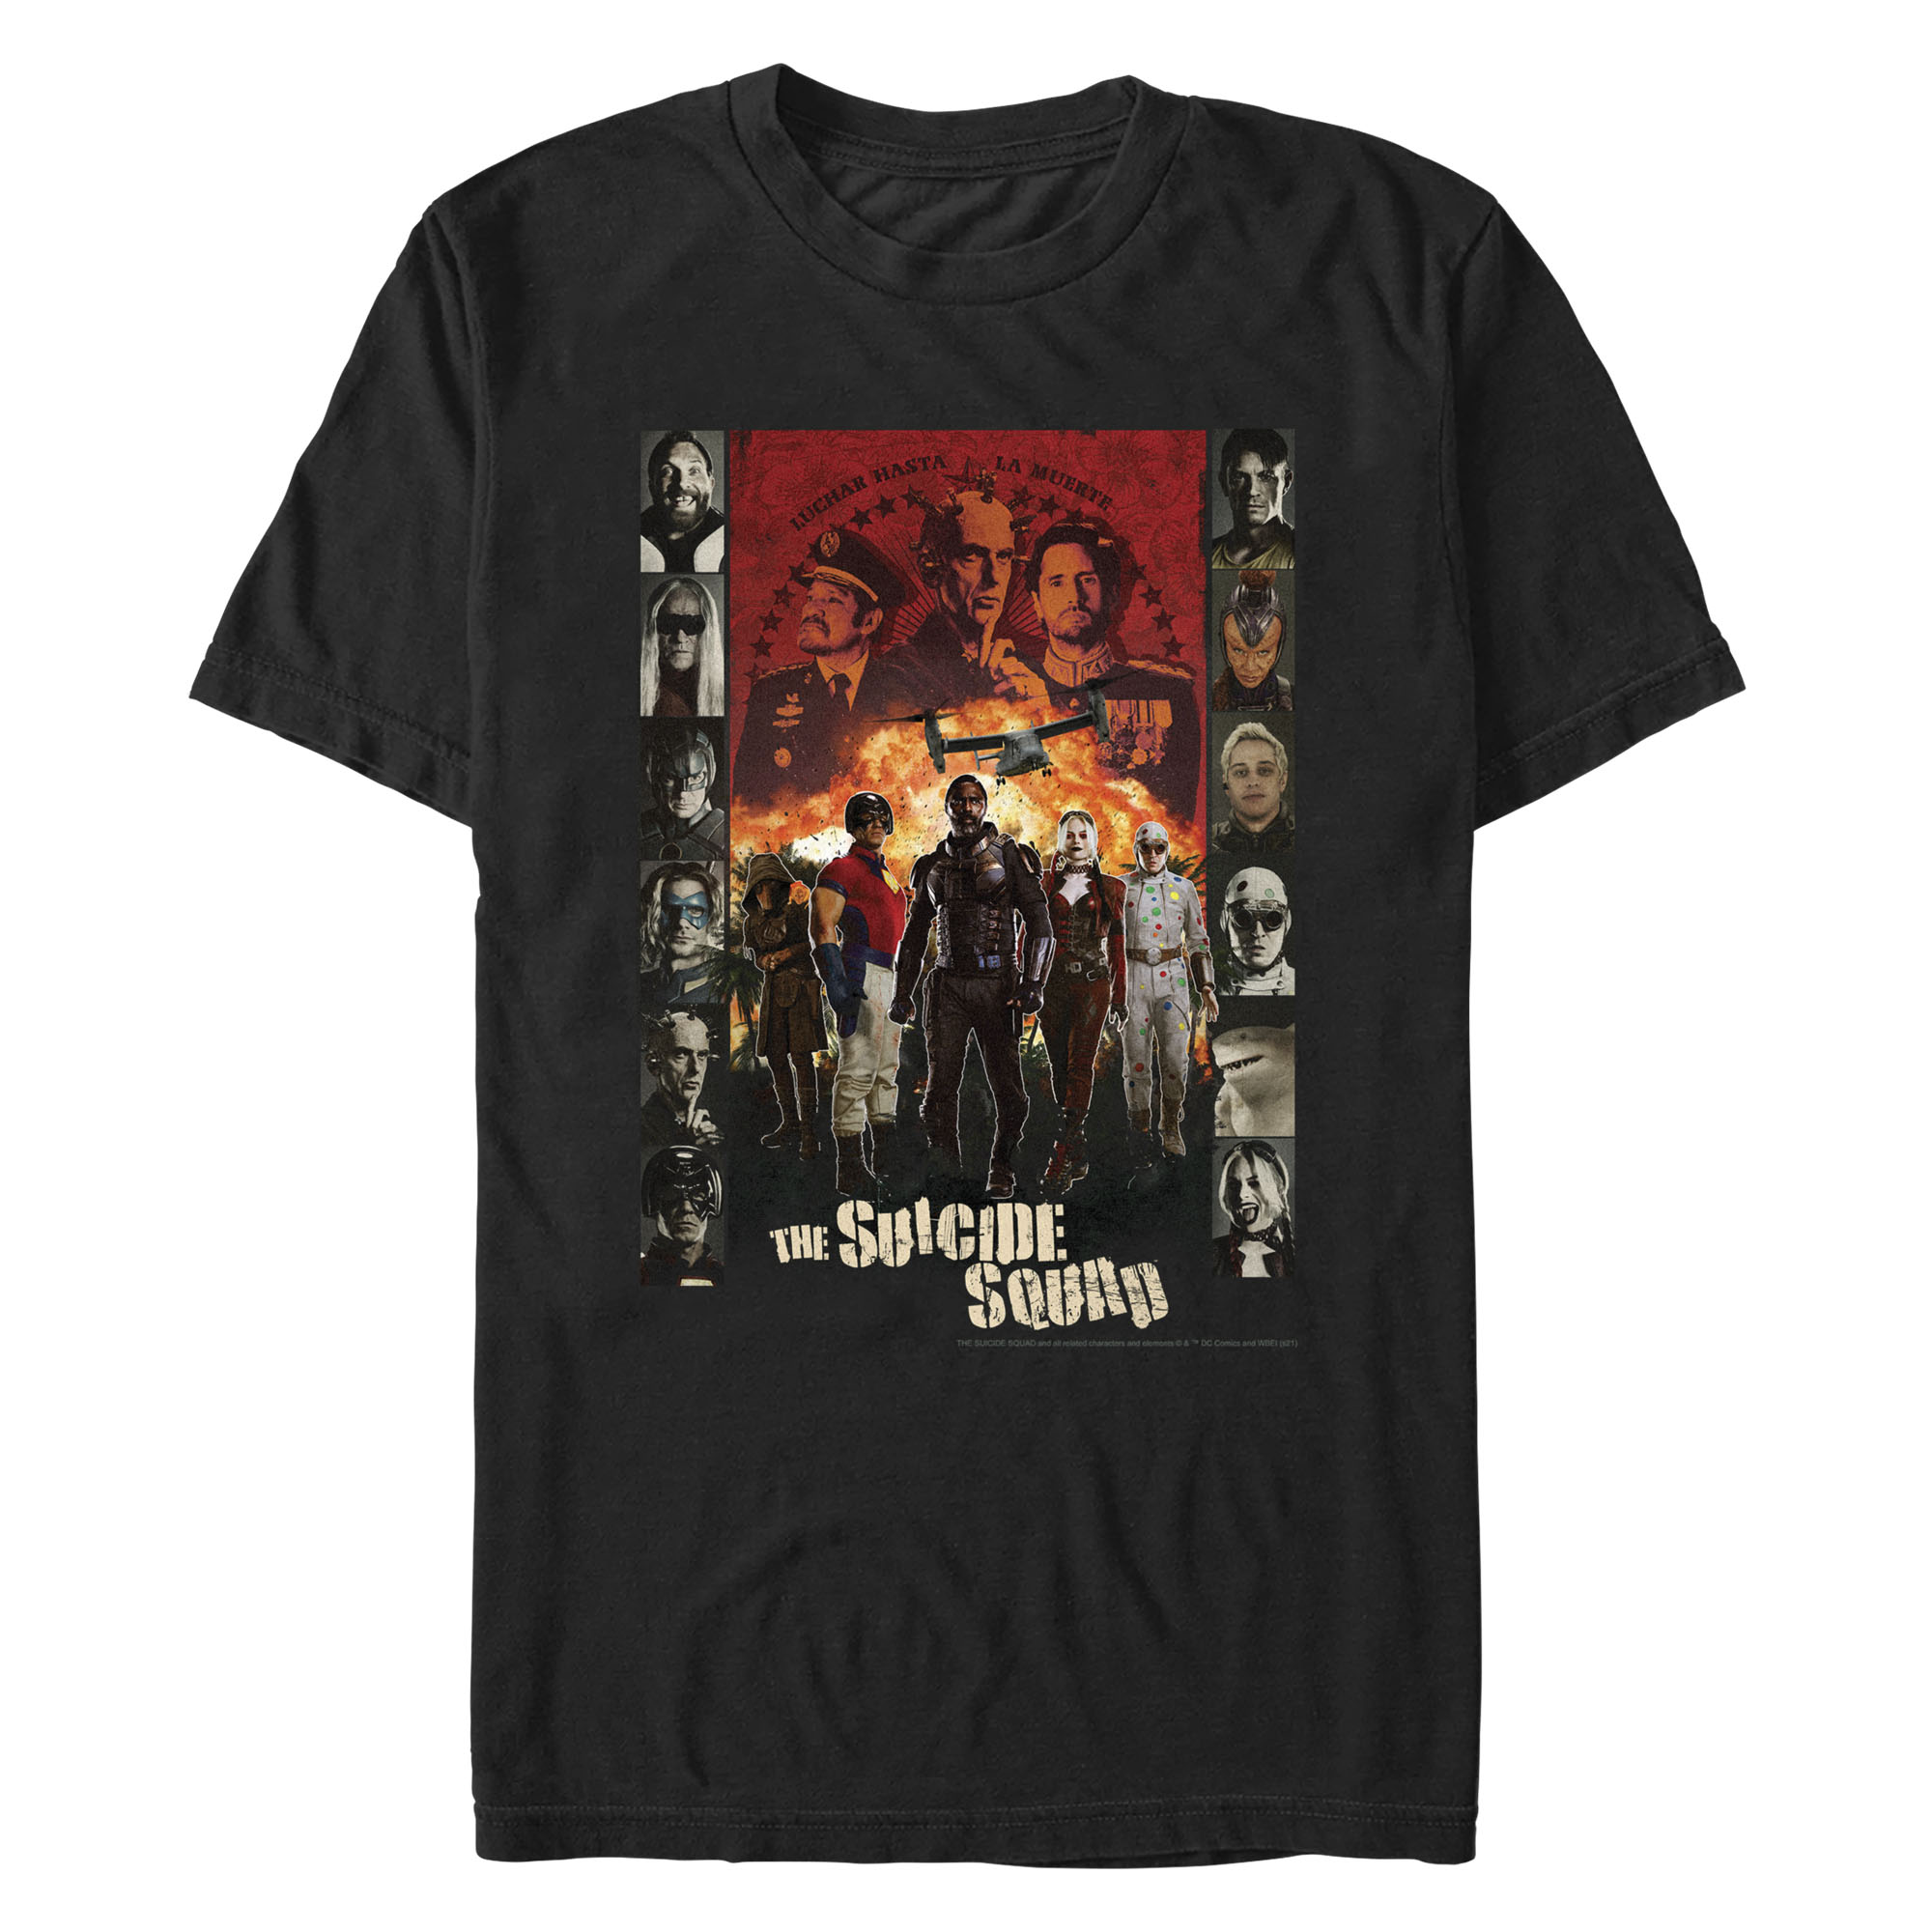 Men's The Suicide Squad Character Poster  Graphic Tee Black X Large - image 1 of 5